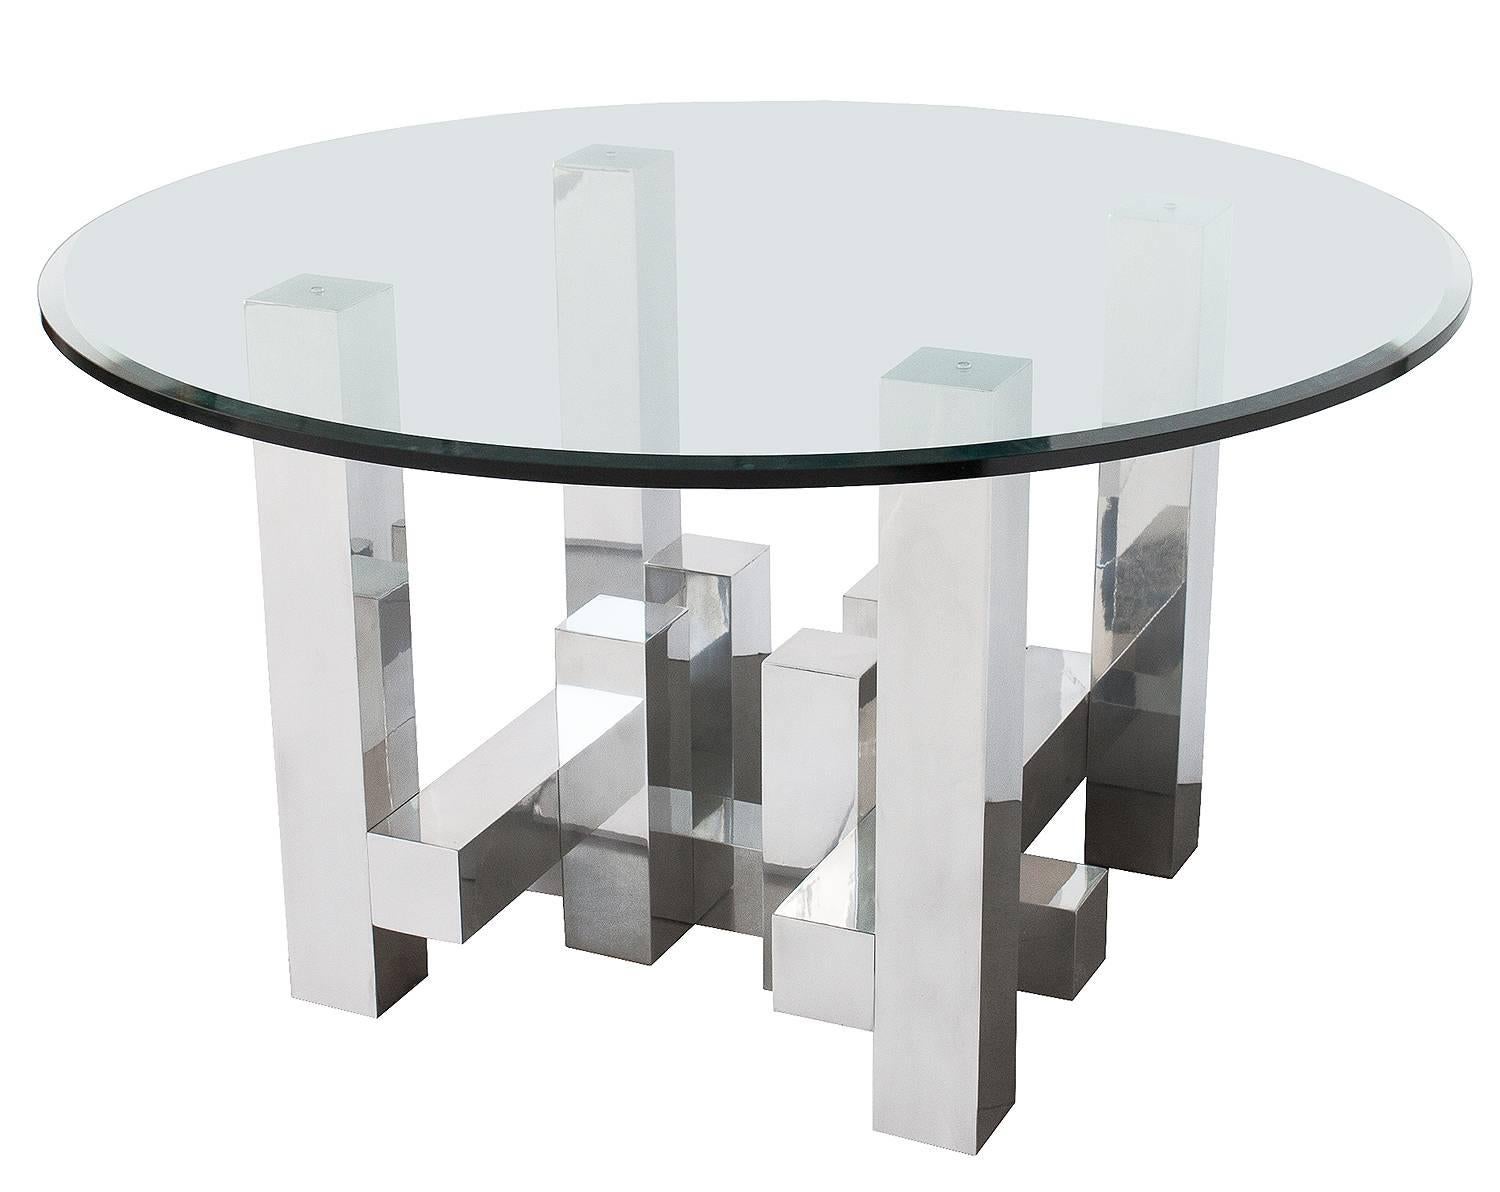 Sculptural geometric dining table base in the manner of Paul Evans' Cityscape collection for Directional Furniture. Designed by Paul Mayen for Habitat, circa 1970s. Constructed of 4